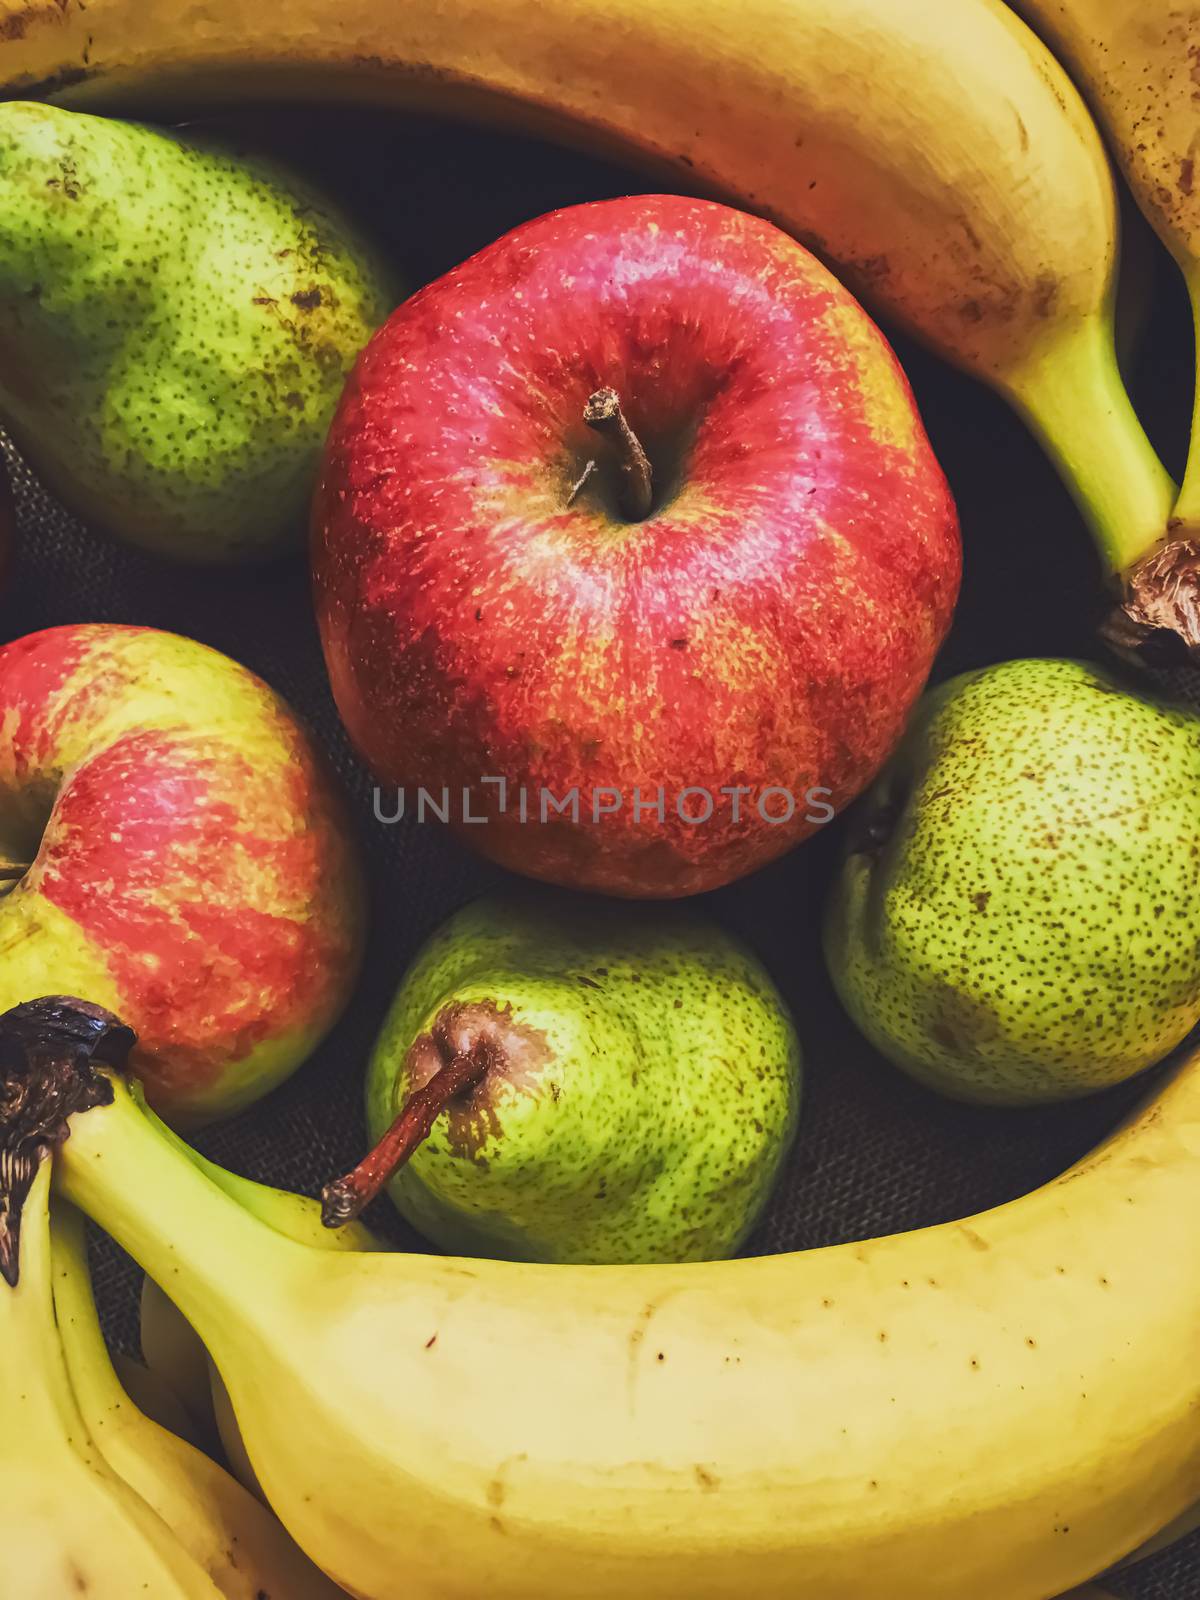 Organic apples, pears and bananas on rustic linen background by Anneleven